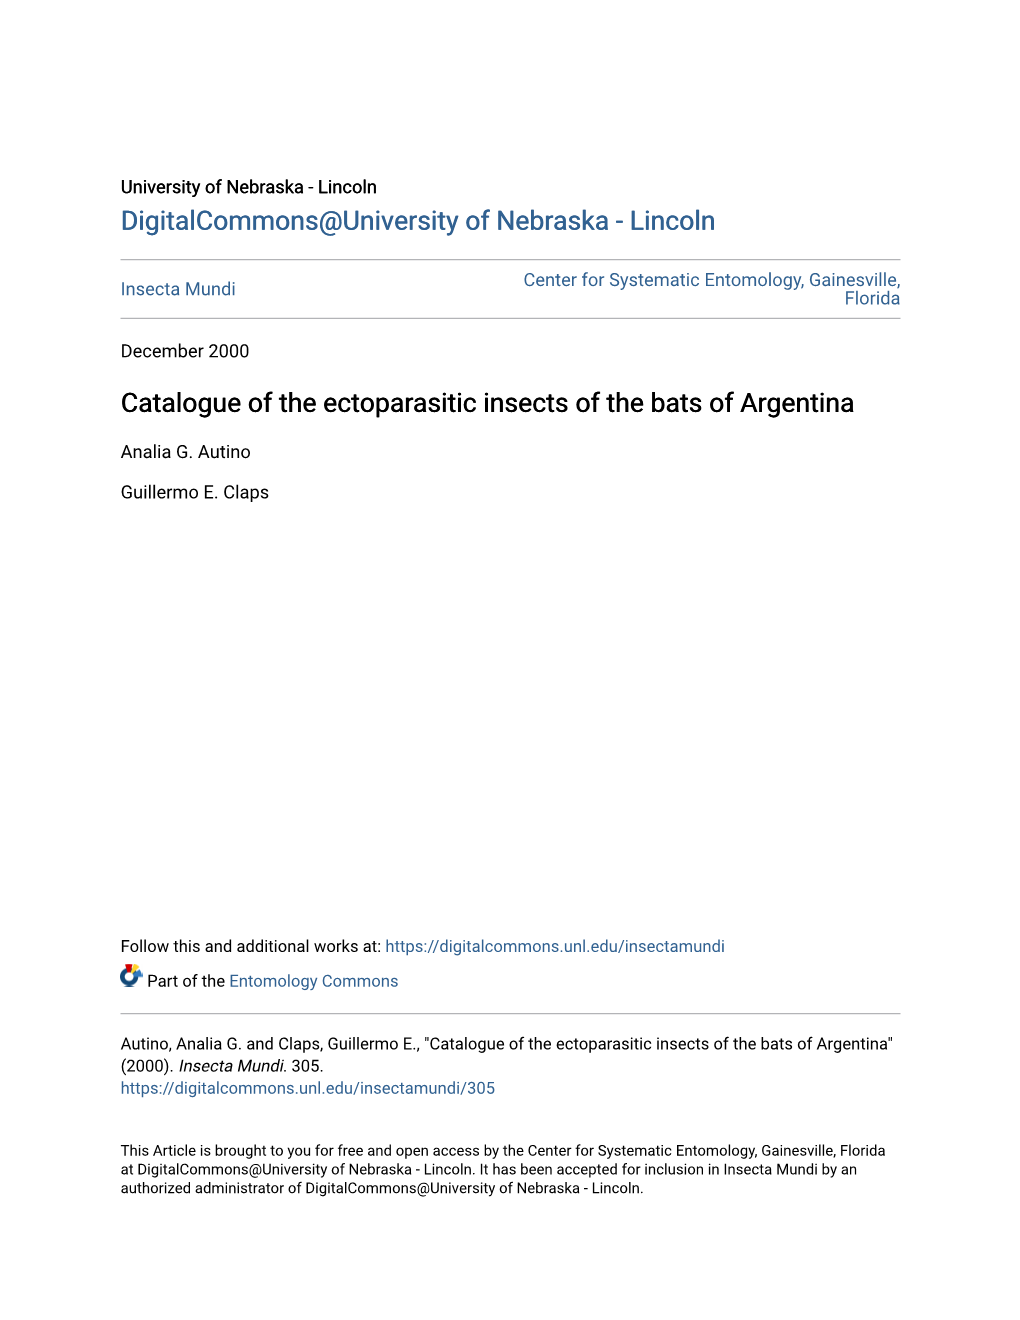 Catalogue of the Ectoparasitic Insects of the Bats of Argentina